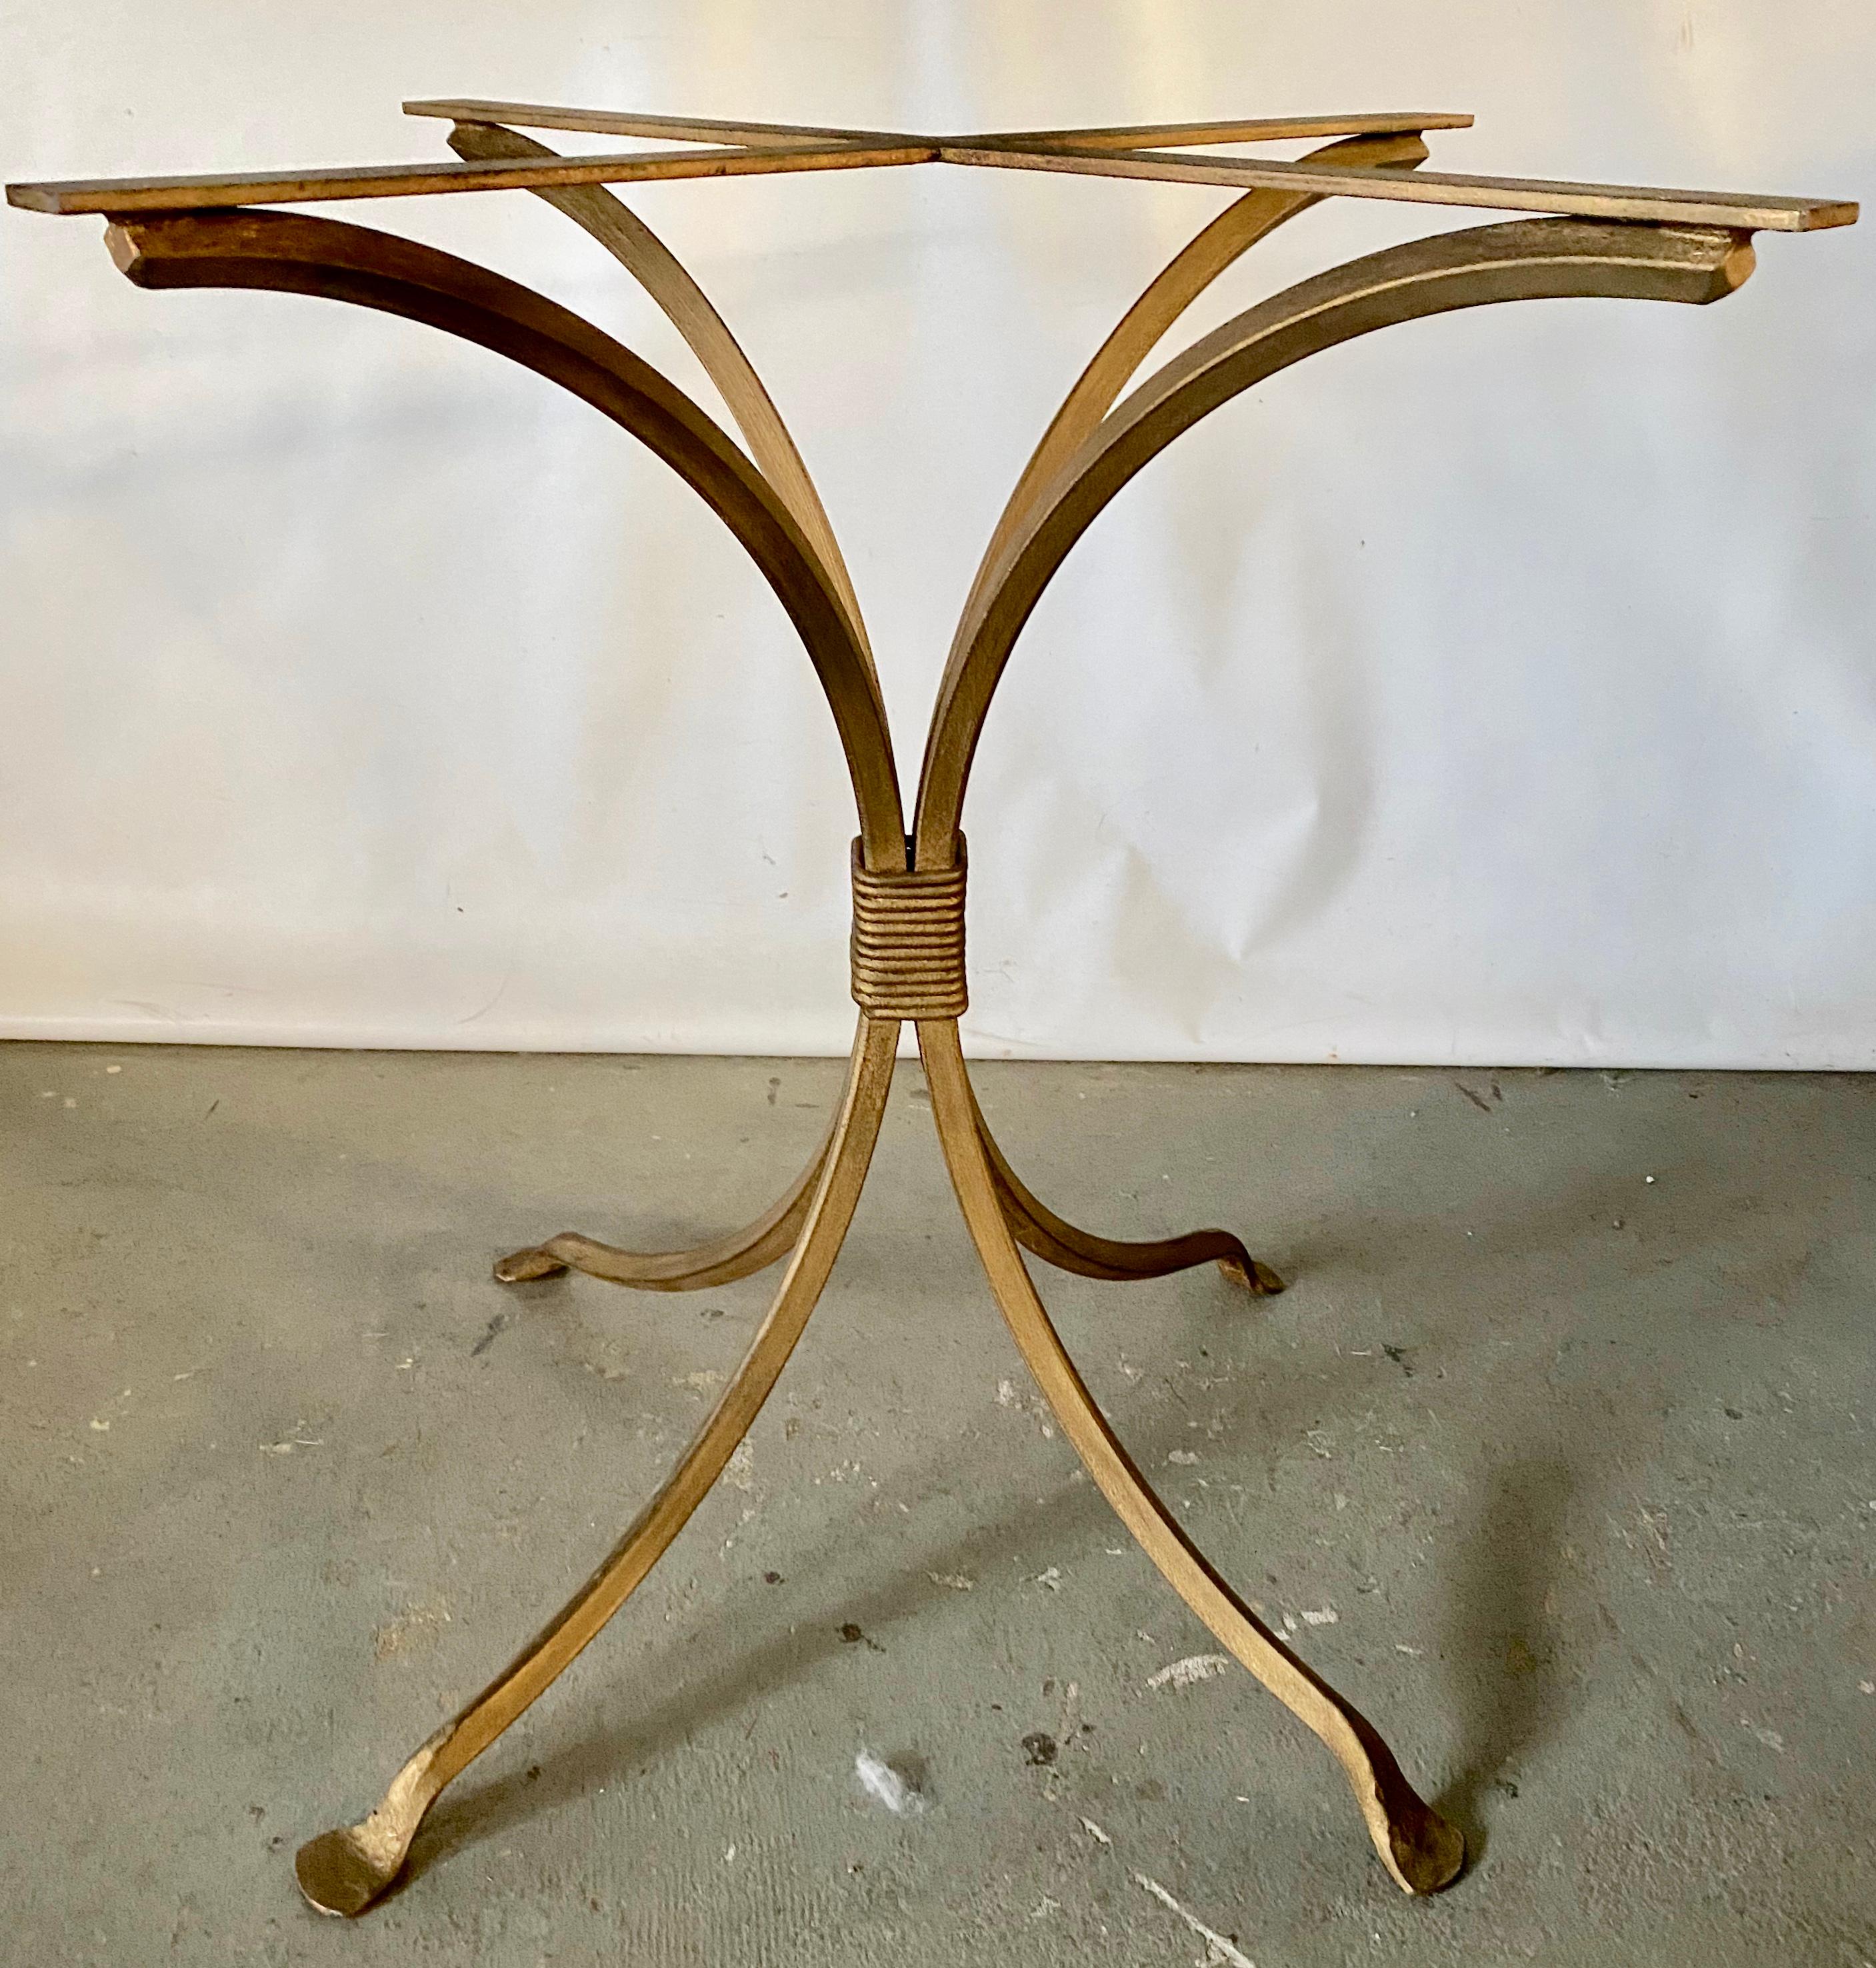 Highly stylish gold gilt metal dinging table base. Perfect for the garden, kitchen table, or dining room table. Top and base can be sold separately so you can add your own glass, stone or wood table top. Table base $2400/Table top 2300. Table base